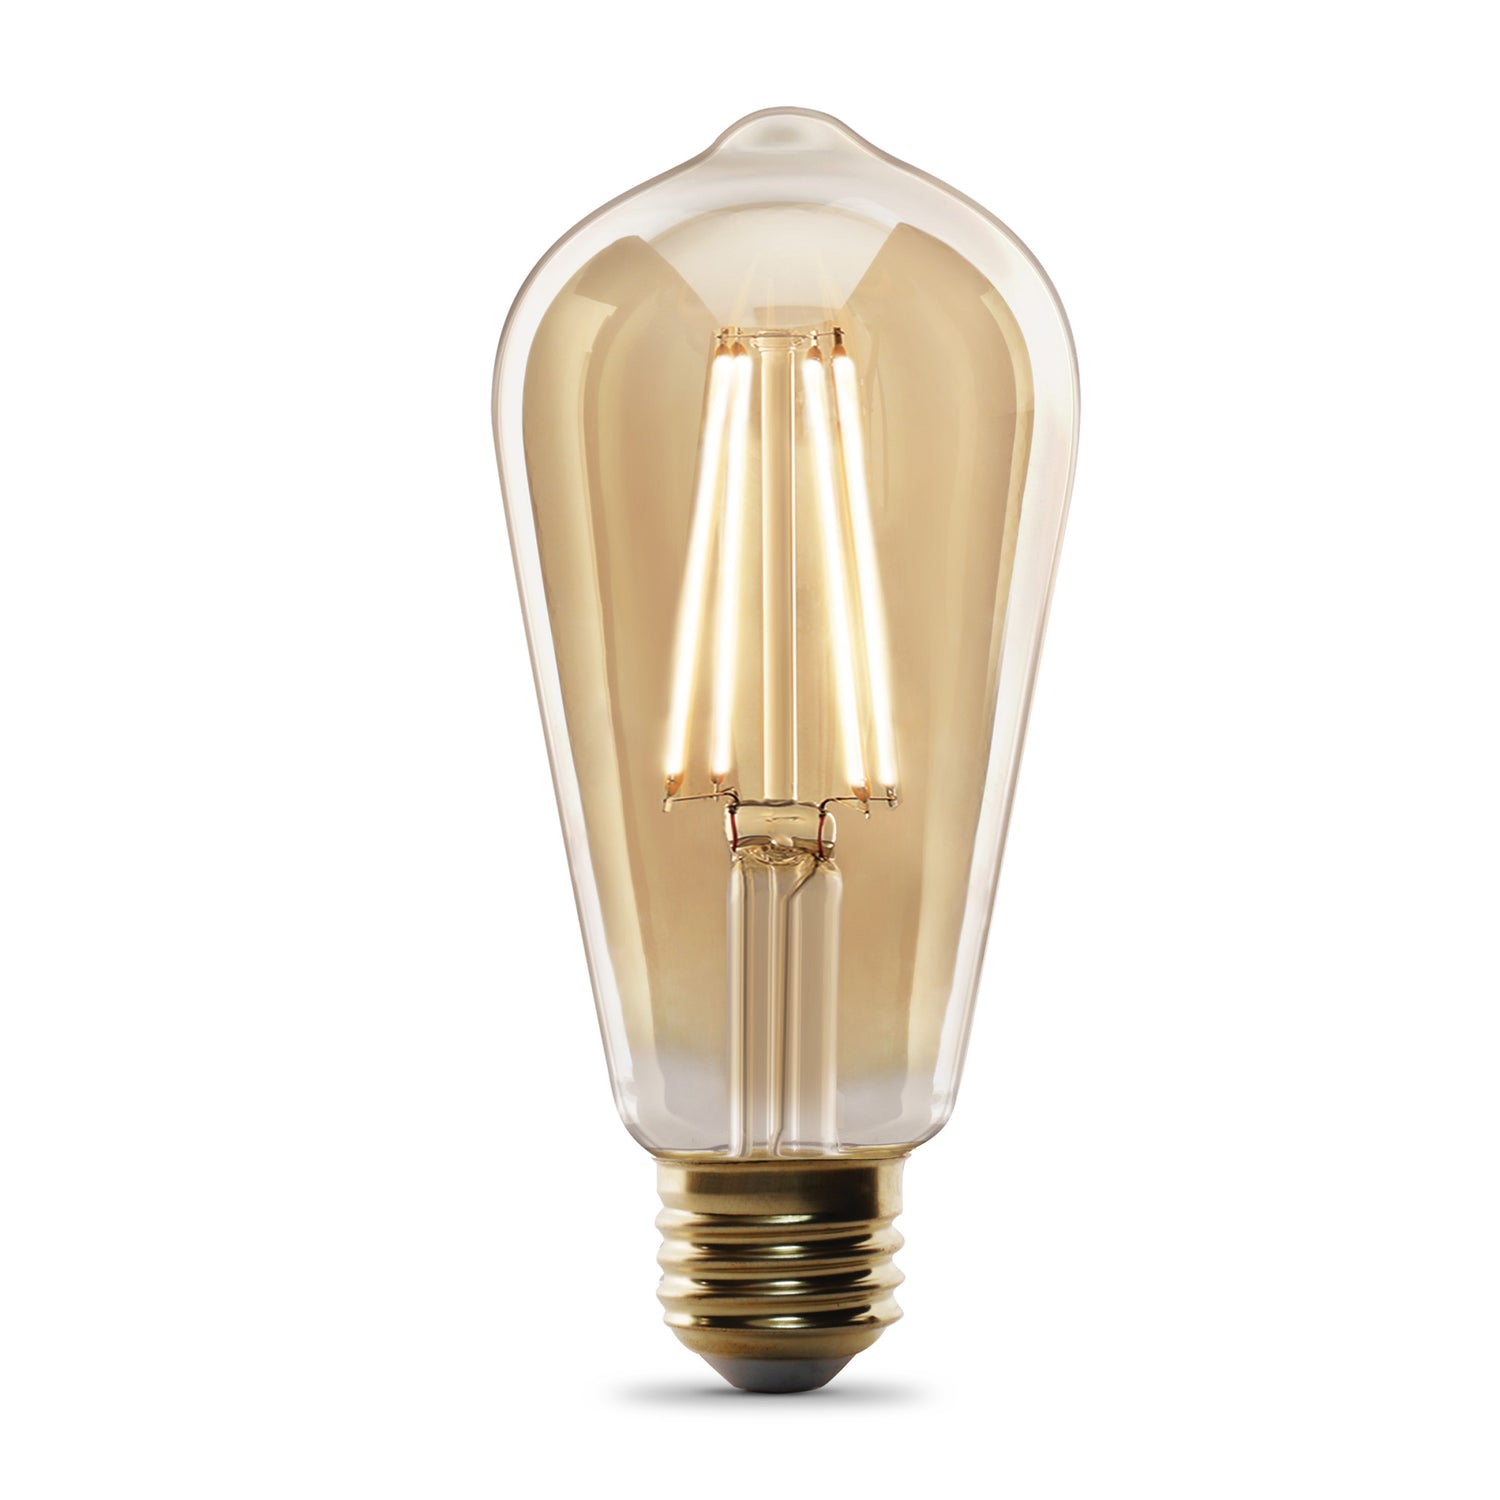 5.5W (60W Replacement) ST19 E26 Straight Filament Amber Glass Vintage Edison LED Light Bulb, Soft White